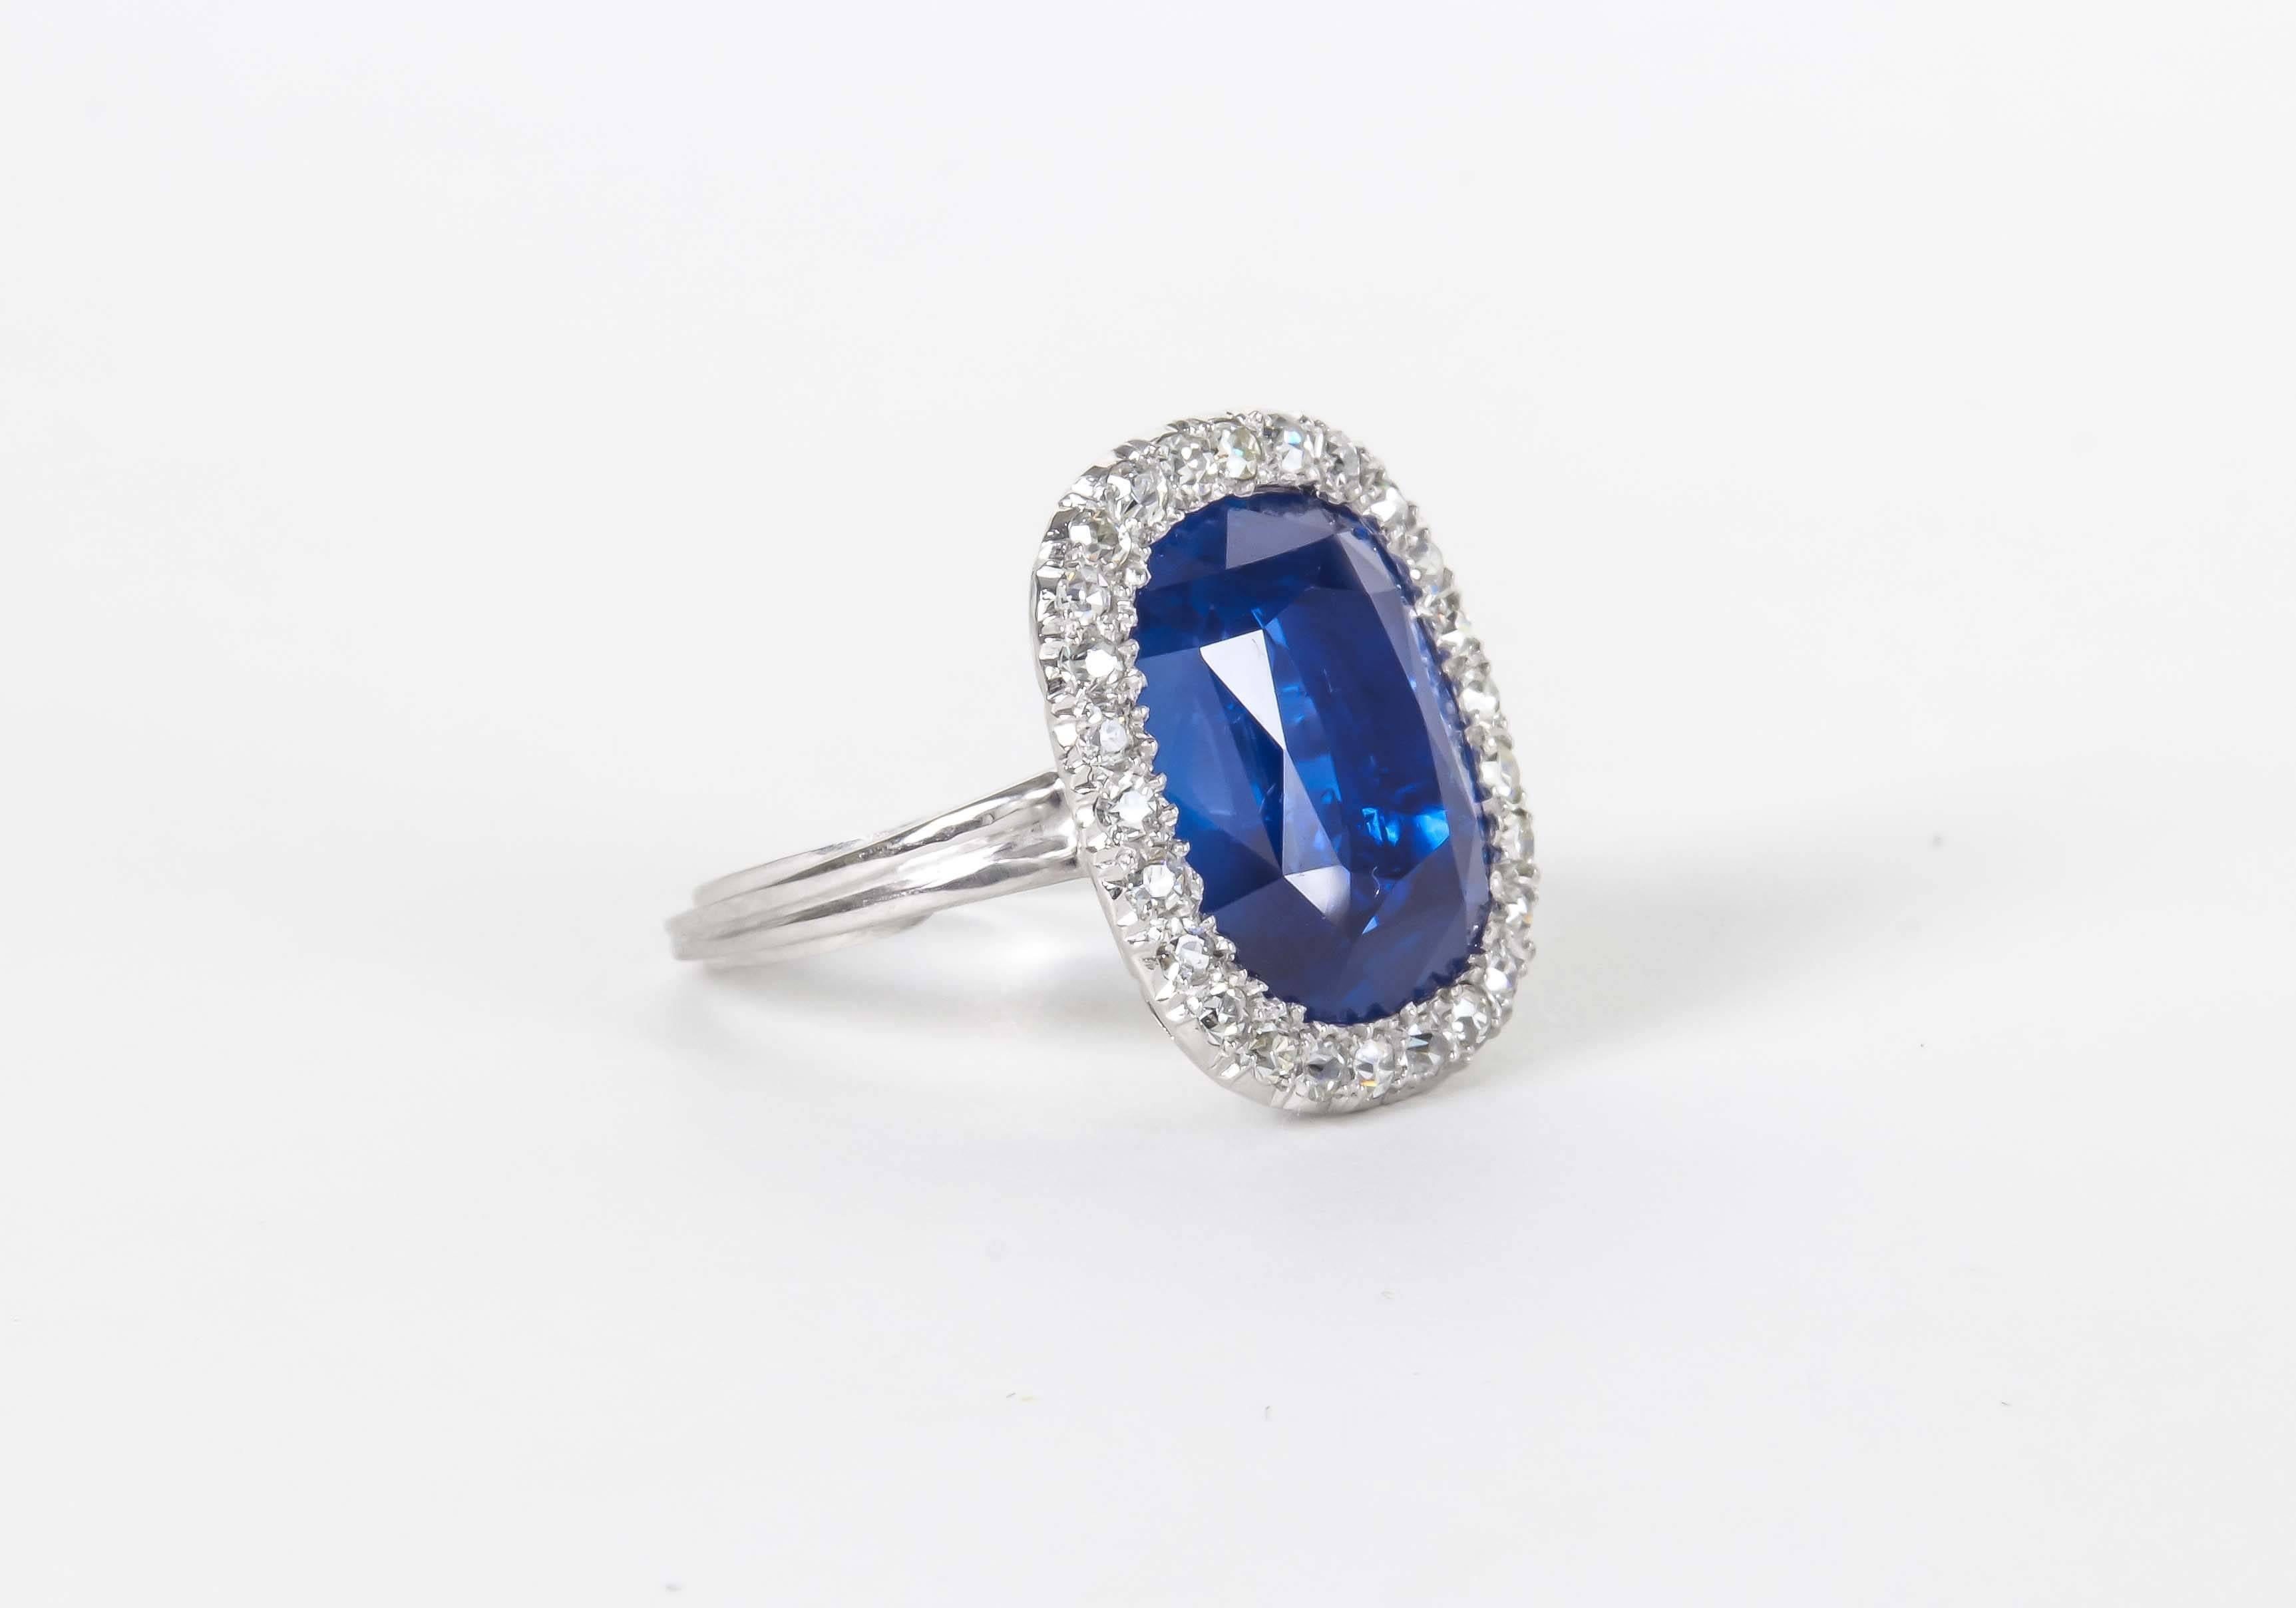 

A collectors dream!!!

A rare GIA certified 15.02 carat Cushion cut Burma Blue Sapphire with ZERO TREATMENT. NO HEAT!

This fabulous Burma Blue Sapphire is set with approximately .50 carats of F color VS clarity round single cut diamonds. A